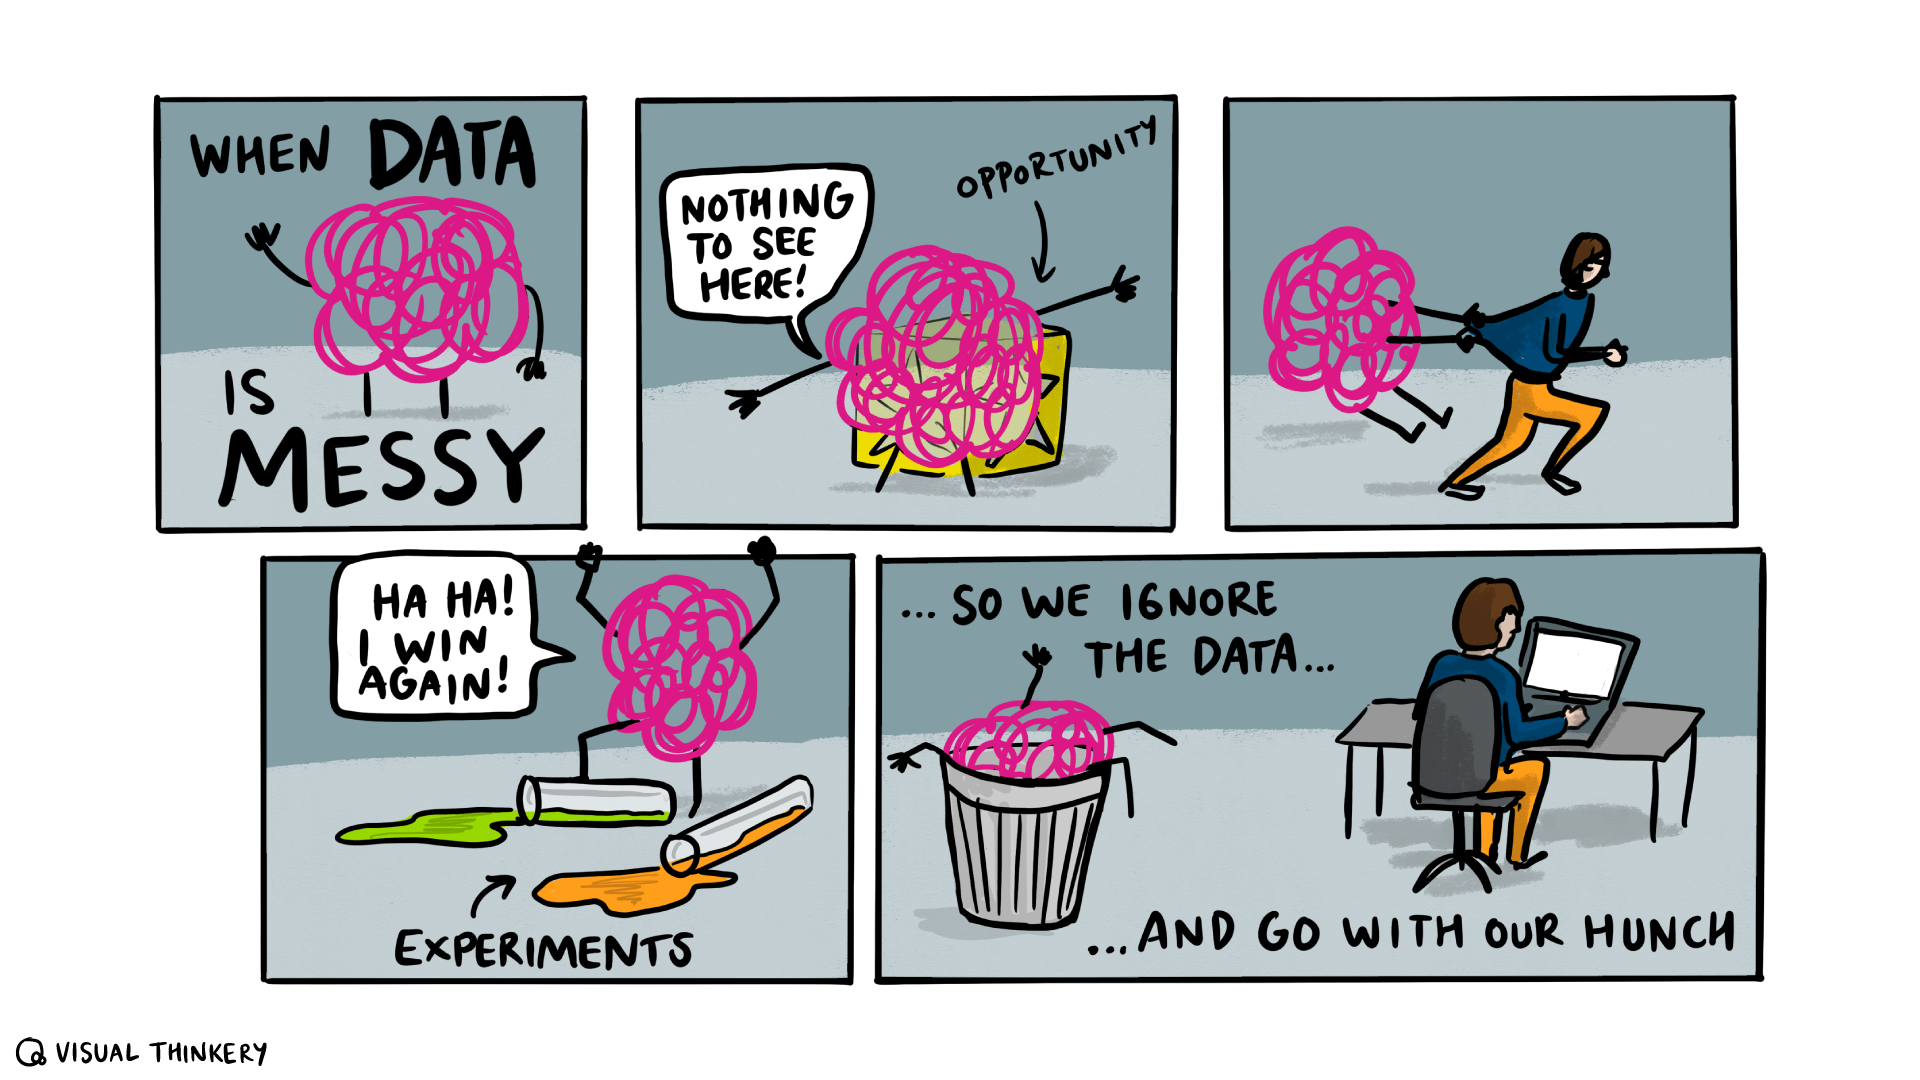 When data is messy